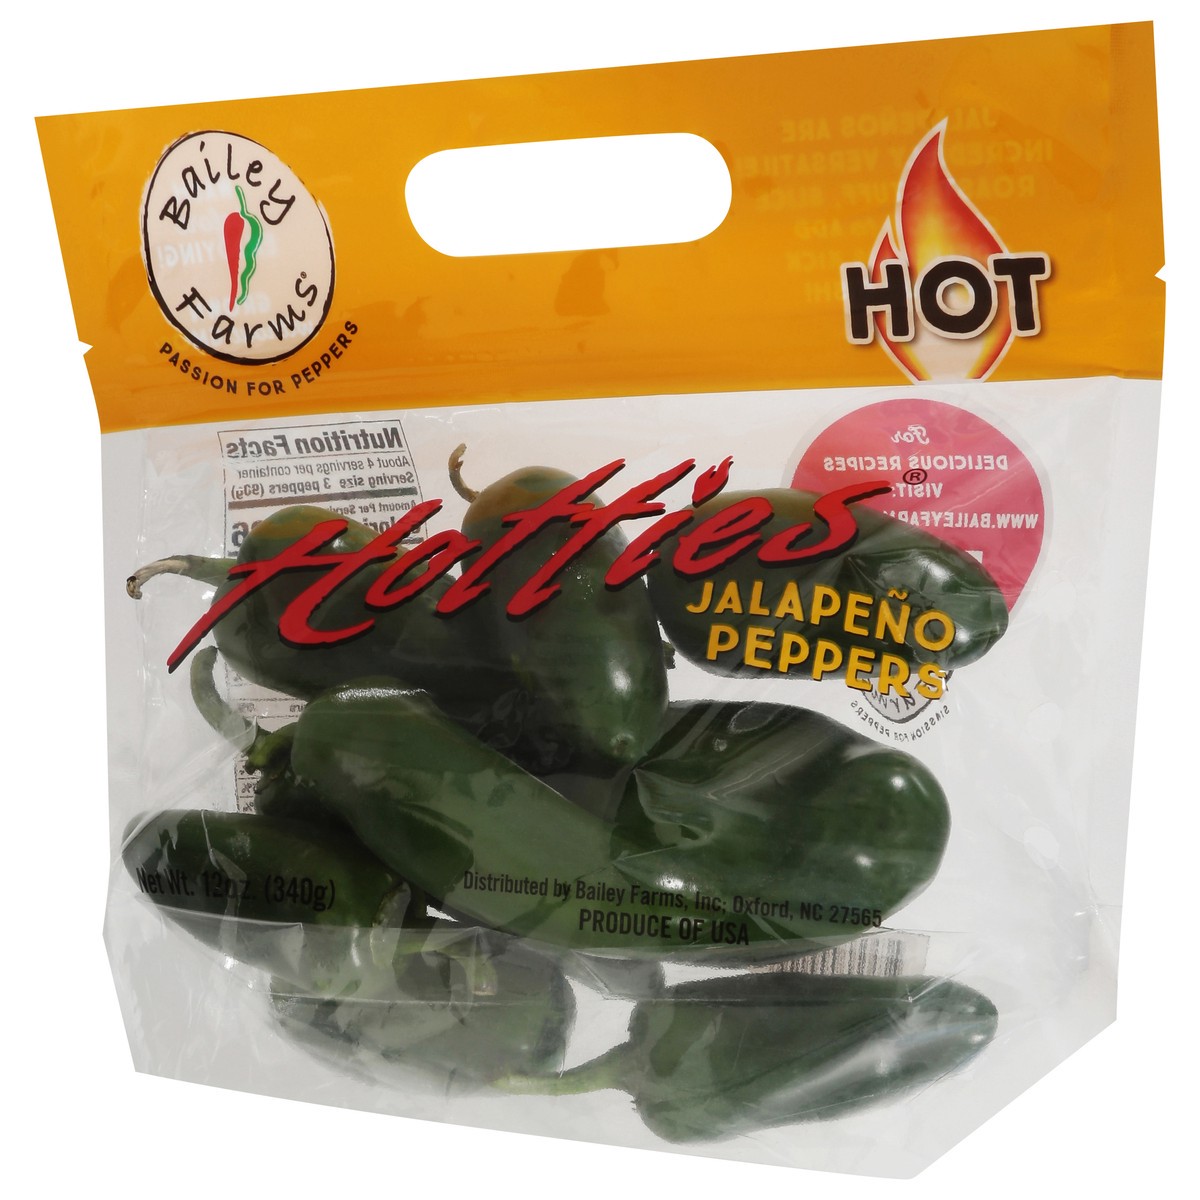 slide 3 of 9, Bailey Farms Hotties Hot Jalapeno Peppers 12 oz, 12 oz